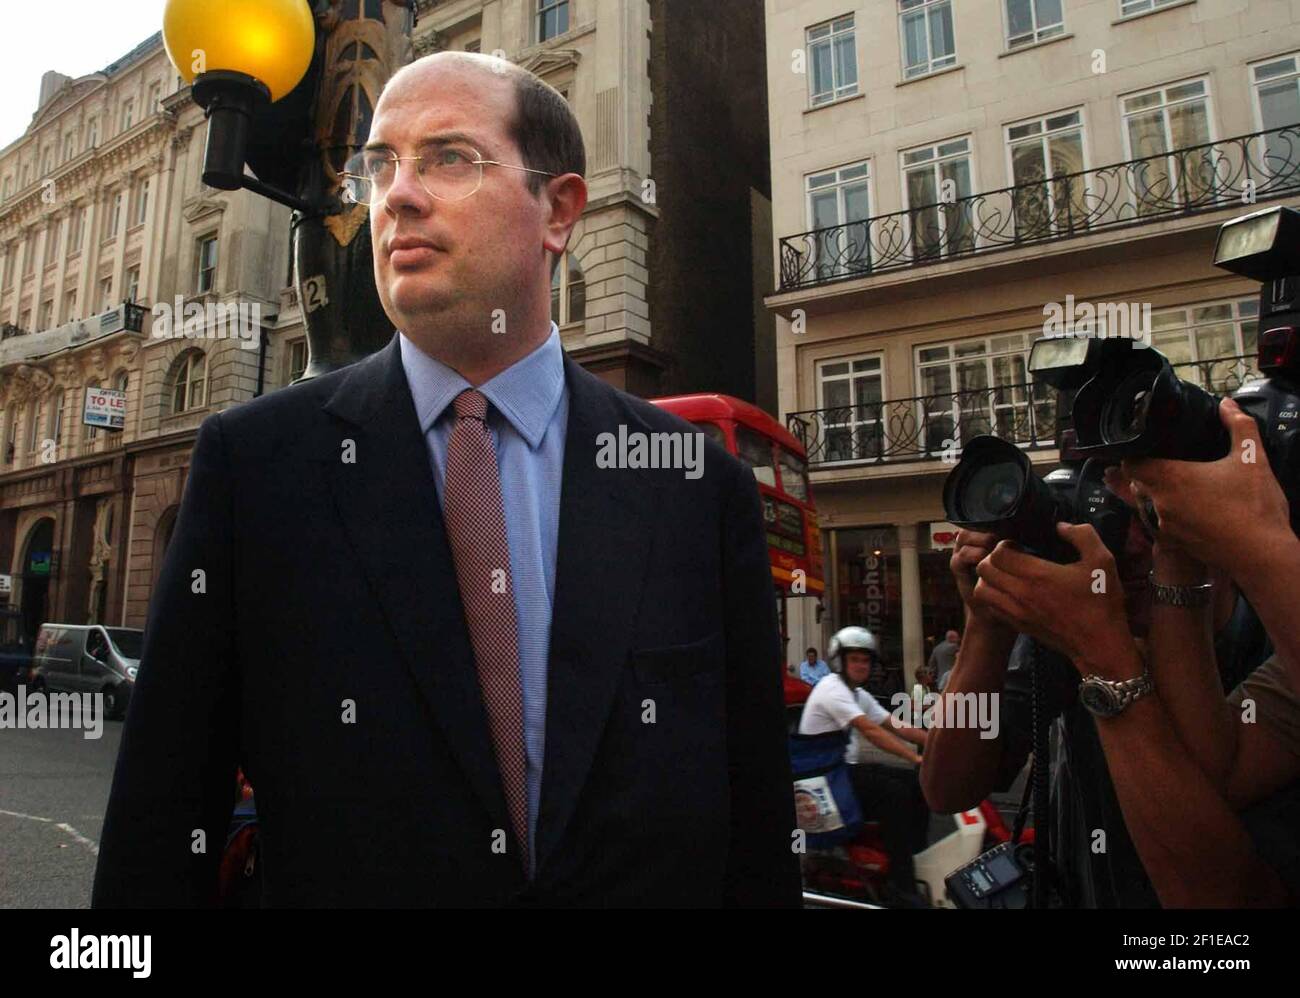 ANDREW GILLIGAN ARRIVES AT THE HIGH CT TO GIVE EVIDENCE TO  THE HUTTON INQUIRY.12/8/03 PILSTON Stock Photo